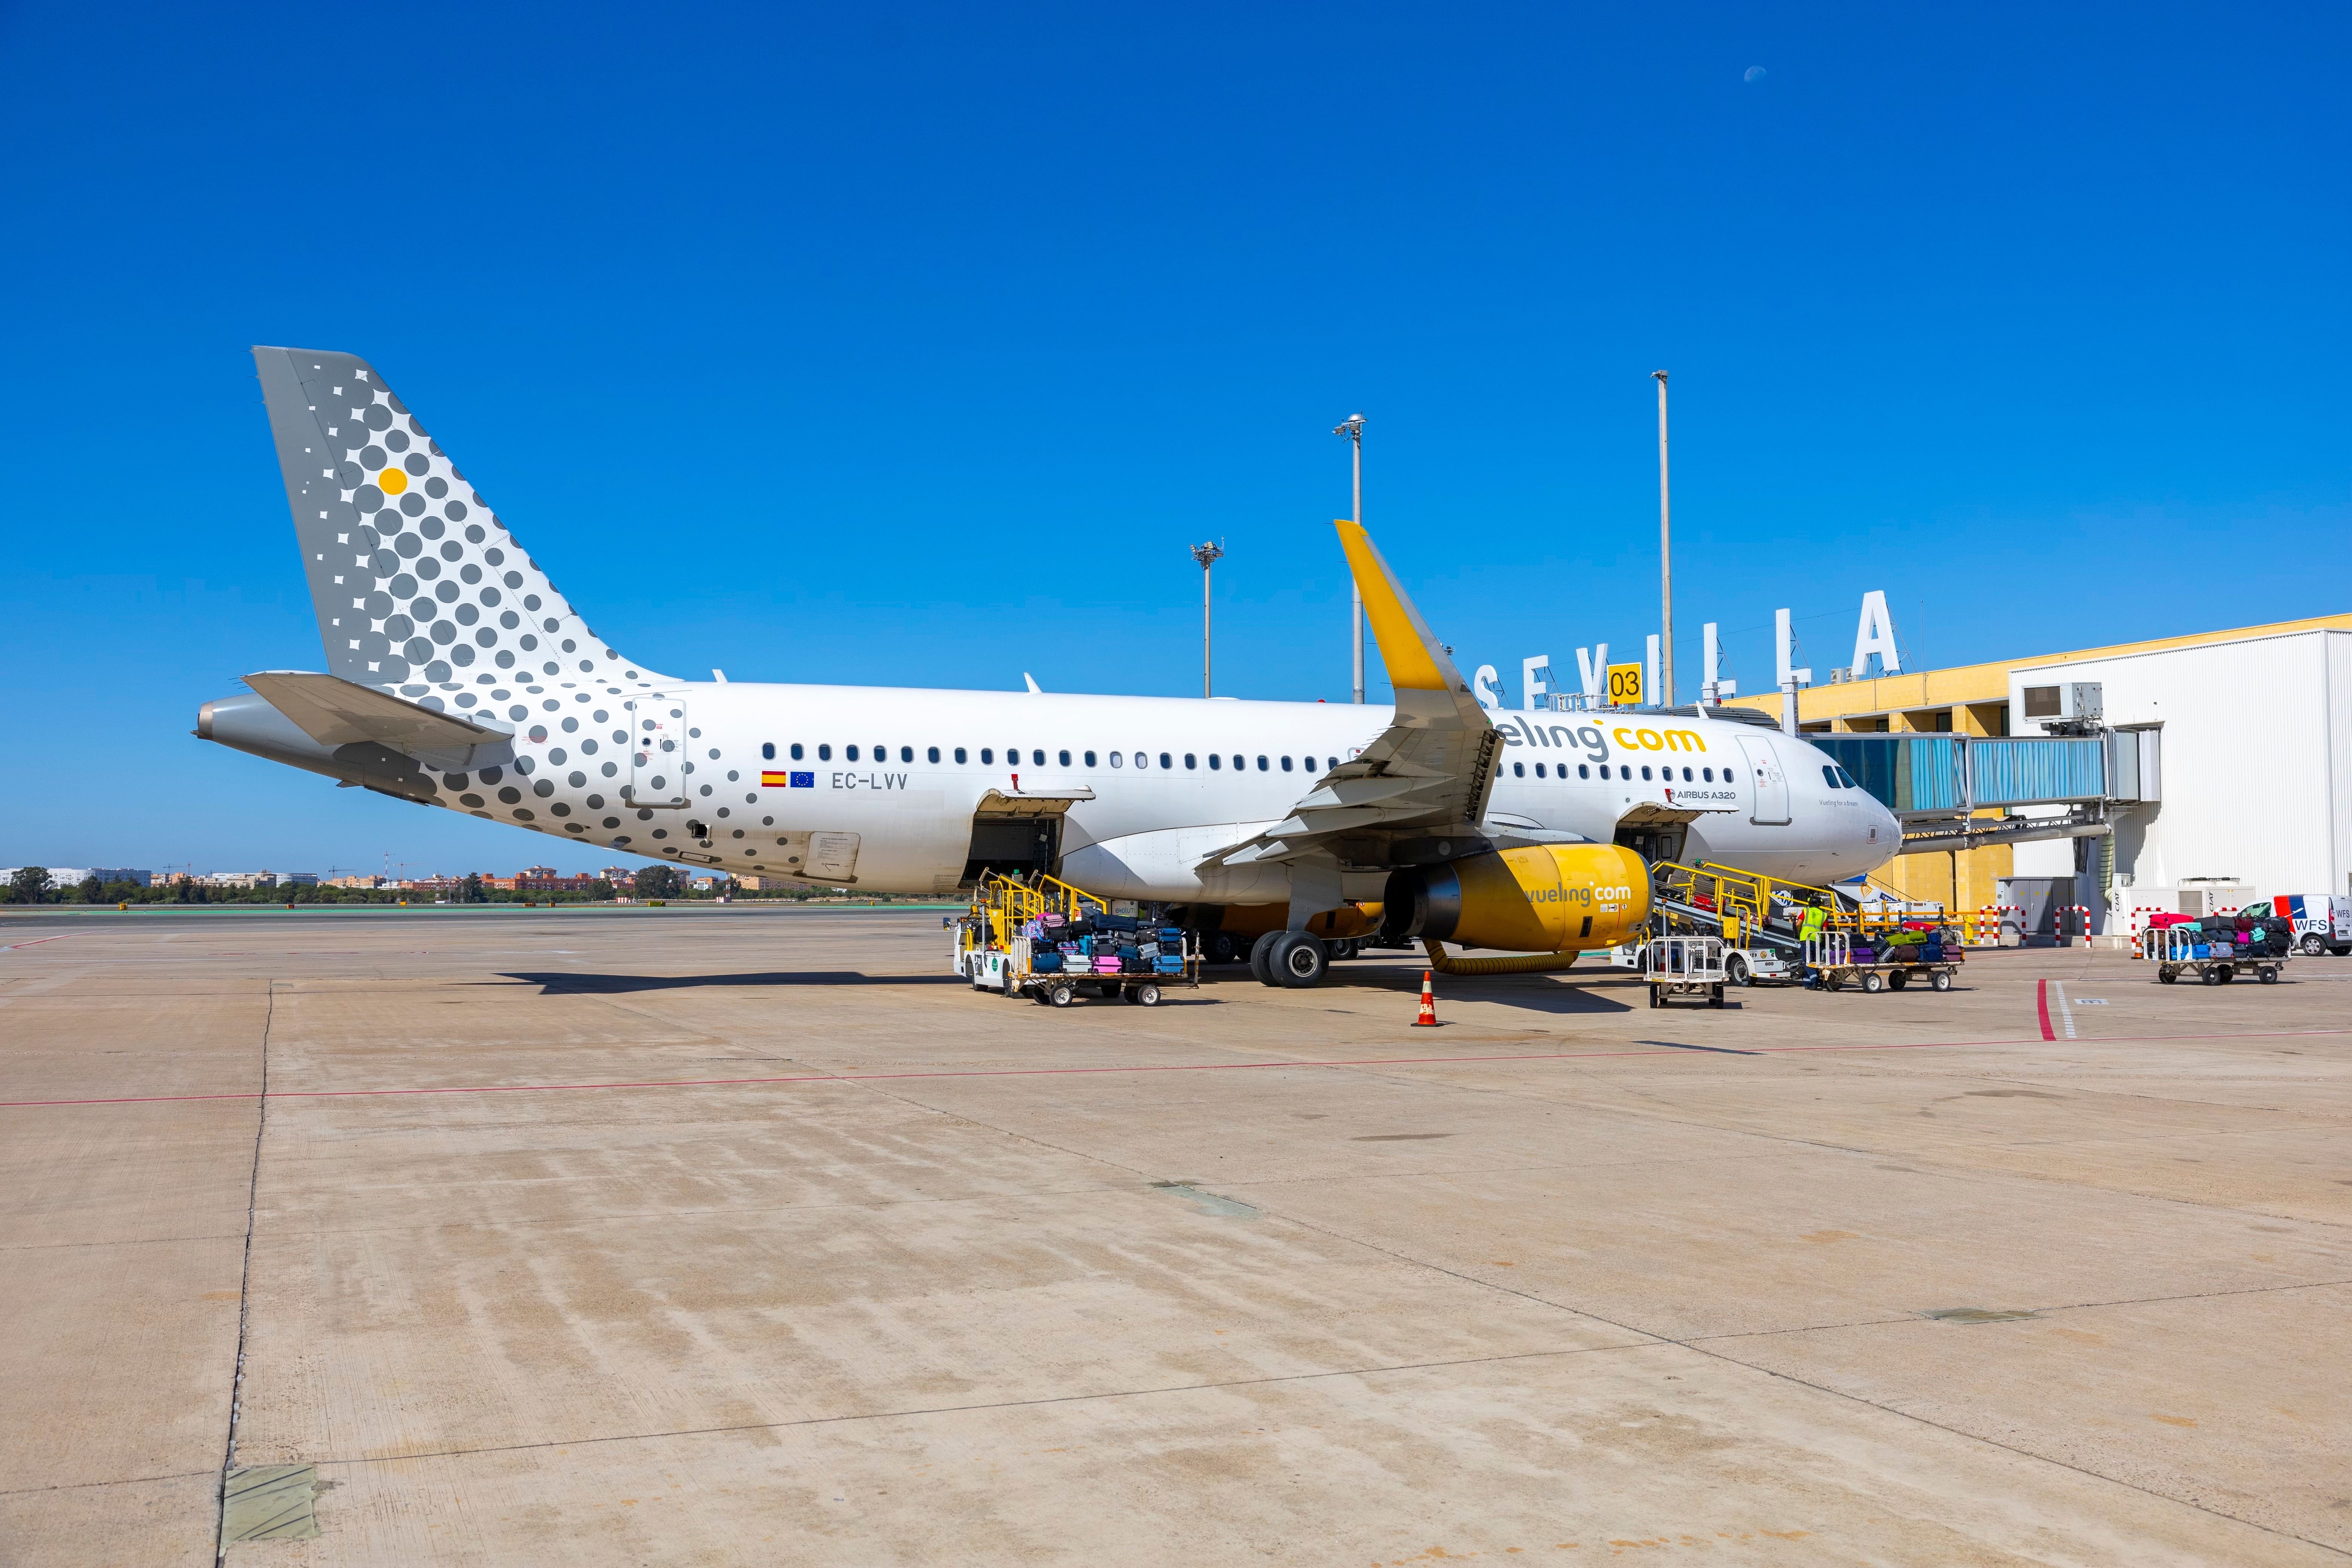 A Vueling Airbus A320 parked at a gate area